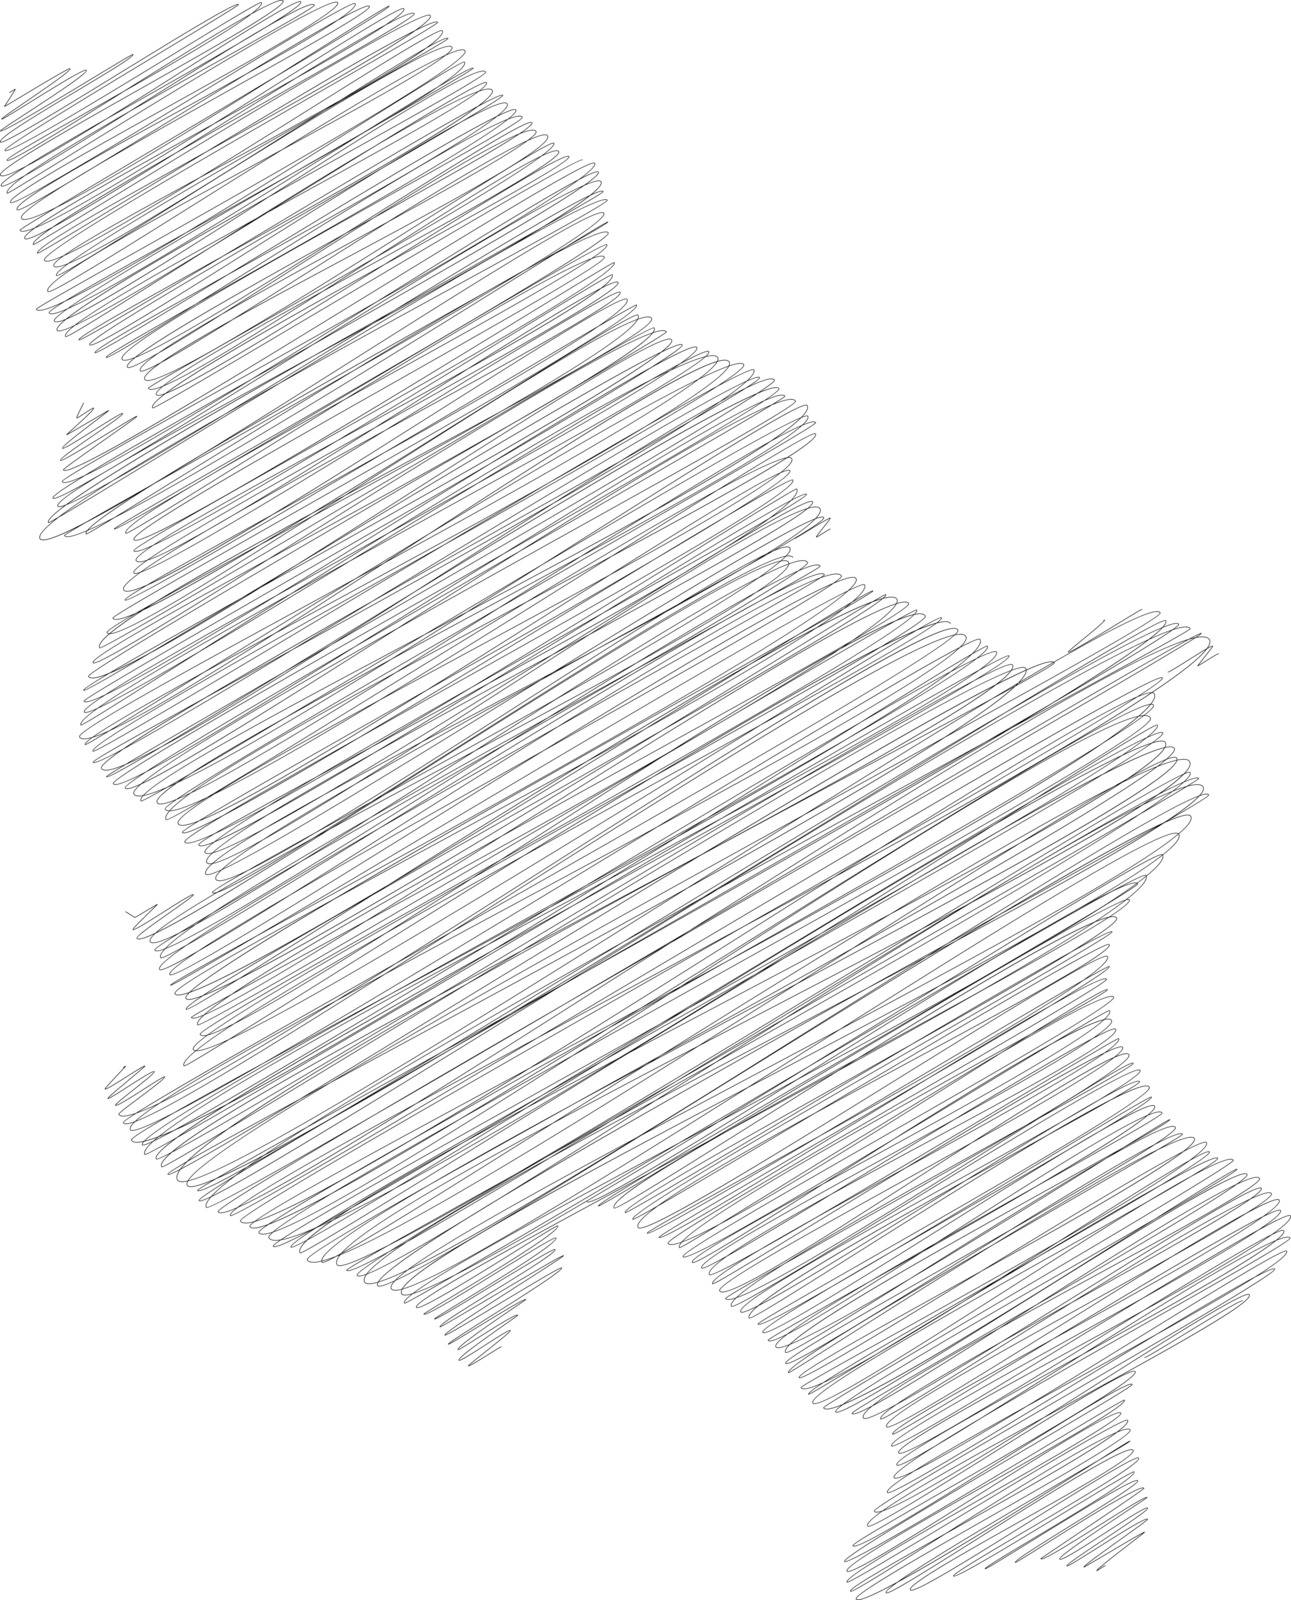 Serbia - solid black silhouette map of country area. Simple flat vector illustration.